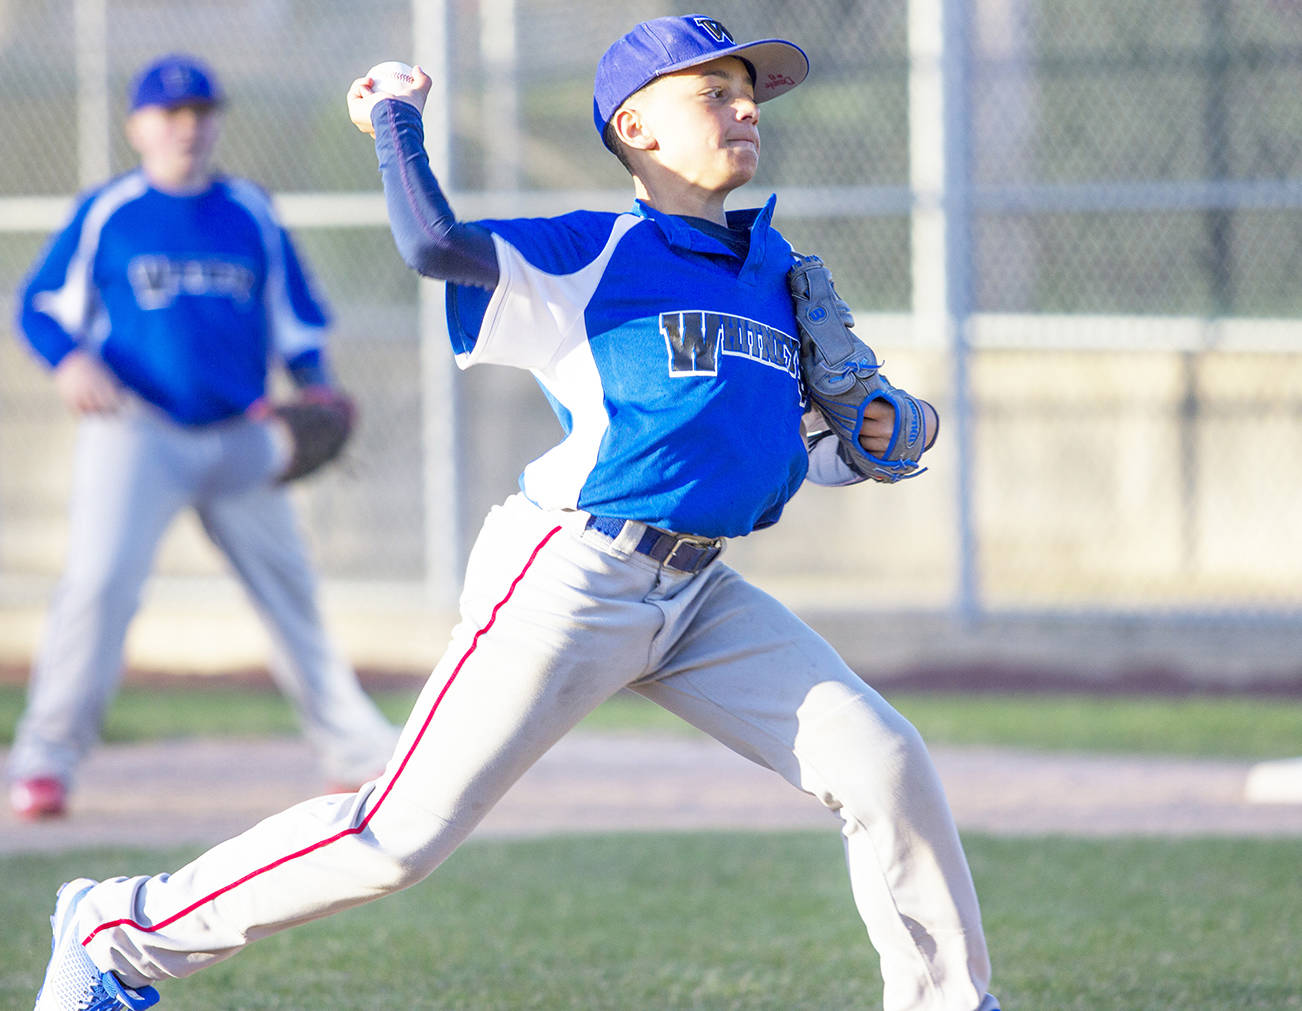 (Photo by Justin Damasiewicz) Whitney’s pitcher Daunte Anothony throws a pitch during a Montesano Little League game against Crow’s Nest on May 23. Anthony was selected to Montesano’s 11-12 year-old district all star team.